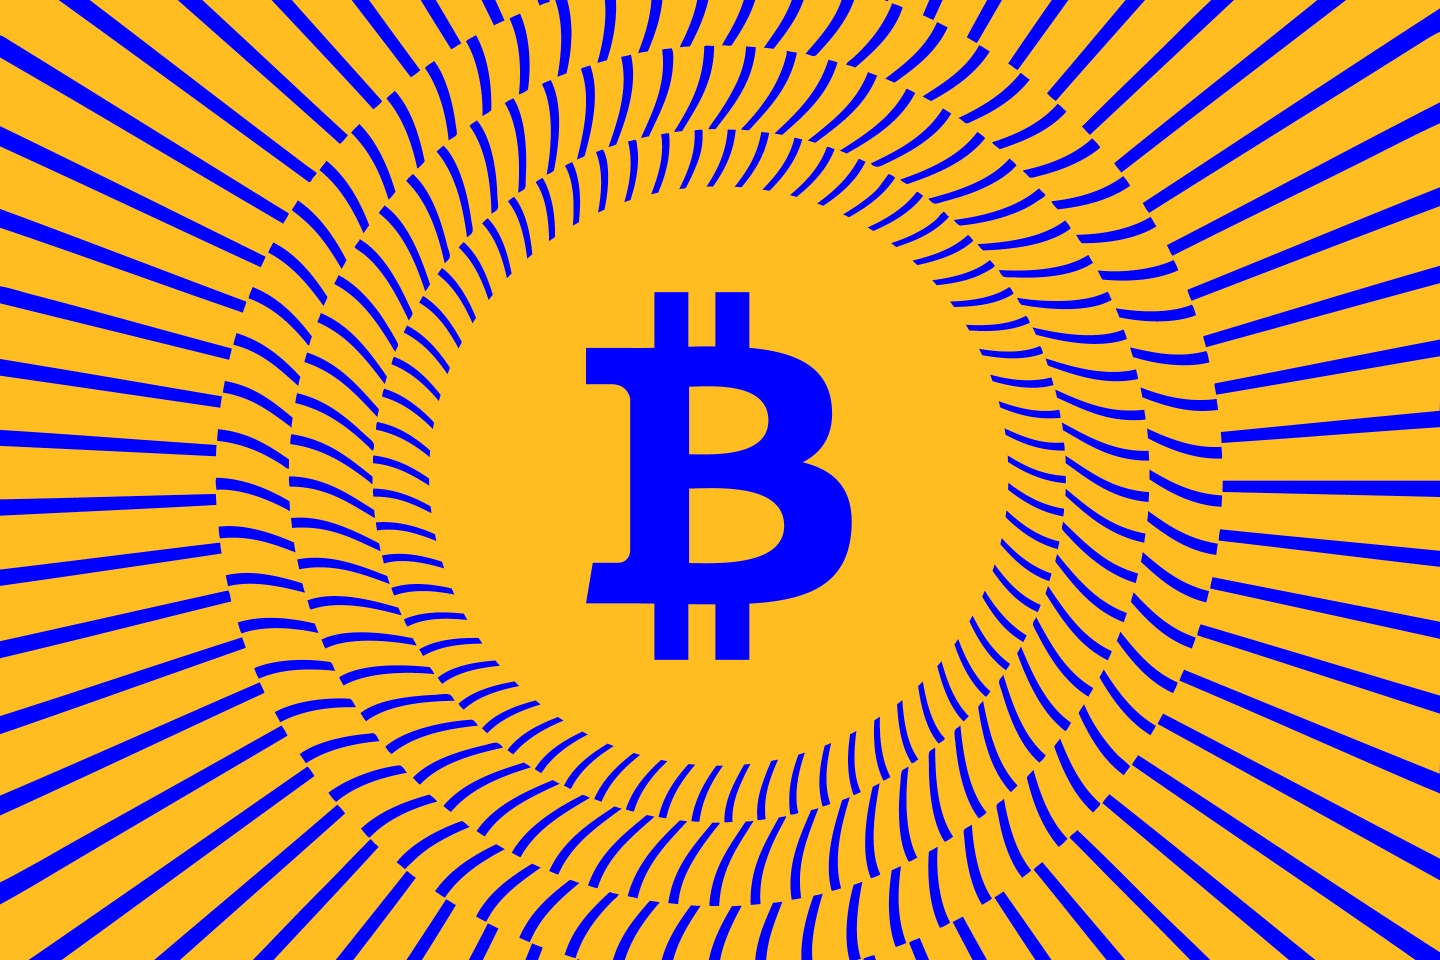 The Bitcoin symbol surround by a graphic background.